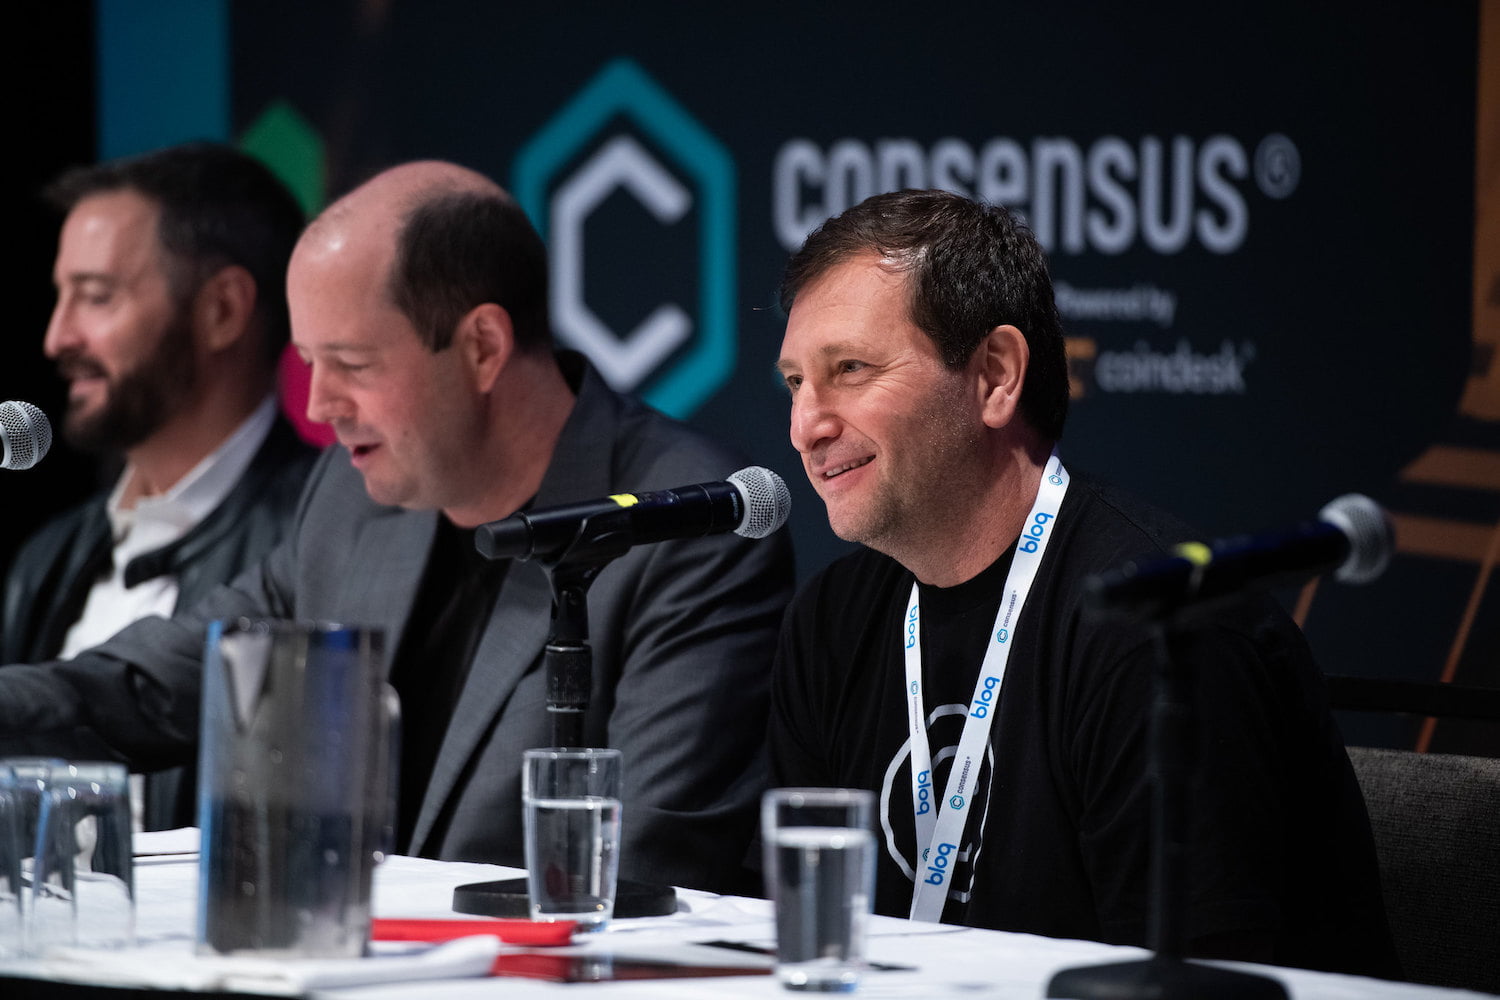 Celsius will set up a new bitcoin mining facility to restabilize its business 2